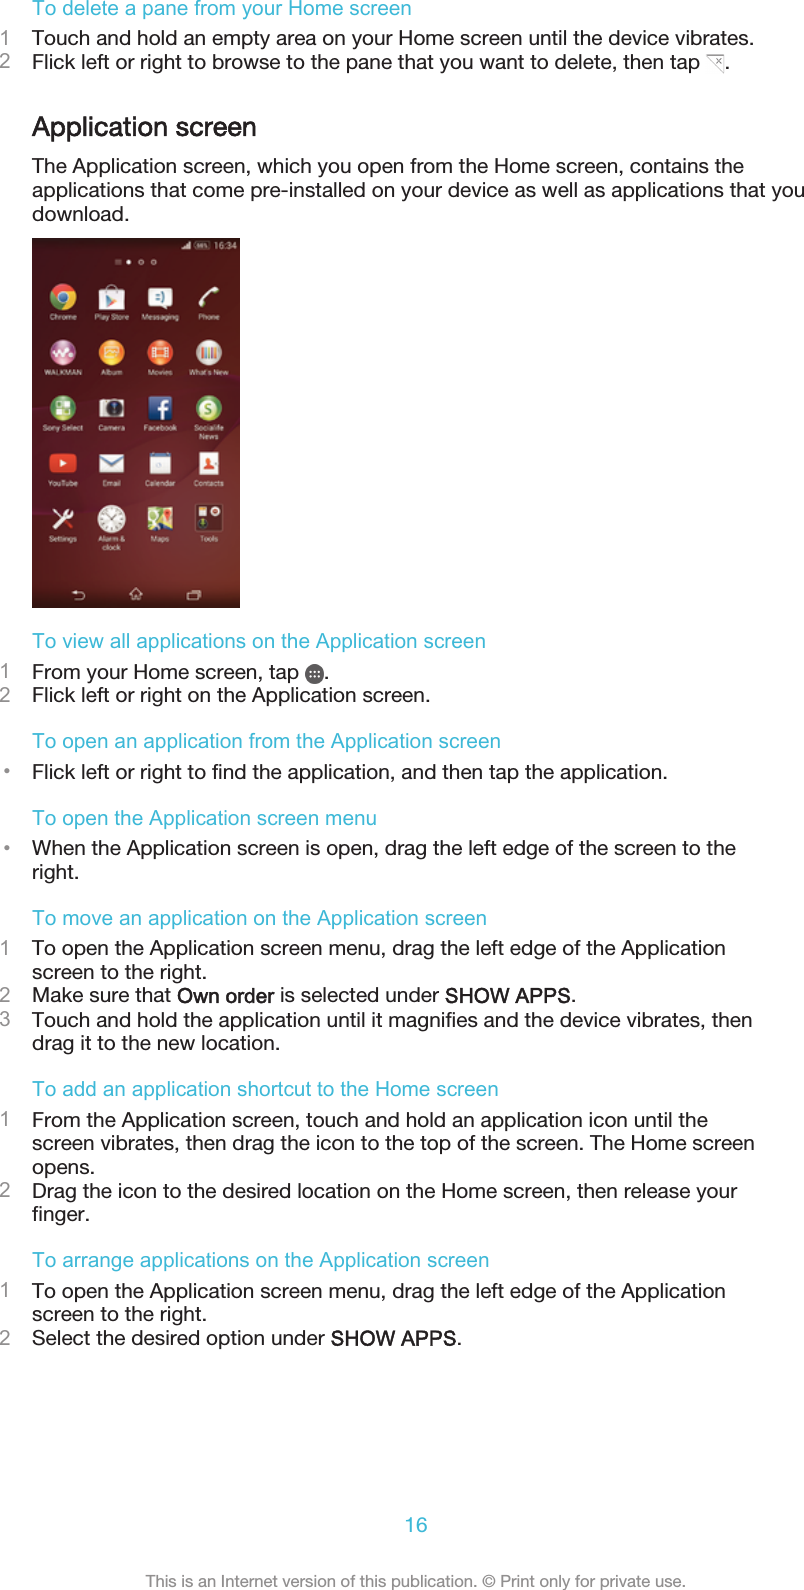 To delete a pane from your Home screen1Touch and hold an empty area on your Home screen until the device vibrates.2Flick left or right to browse to the pane that you want to delete, then tap  .Application screenThe Application screen, which you open from the Home screen, contains theapplications that come pre-installed on your device as well as applications that youdownload.To view all applications on the Application screen1From your Home screen, tap  .2Flick left or right on the Application screen.To open an application from the Application screen•Flick left or right to find the application, and then tap the application.To open the Application screen menu•When the Application screen is open, drag the left edge of the screen to theright.To move an application on the Application screen1To open the Application screen menu, drag the left edge of the Applicationscreen to the right.2Make sure that Own order is selected under SHOW APPS.3Touch and hold the application until it magnifies and the device vibrates, thendrag it to the new location.To add an application shortcut to the Home screen1From the Application screen, touch and hold an application icon until thescreen vibrates, then drag the icon to the top of the screen. The Home screenopens.2Drag the icon to the desired location on the Home screen, then release yourfinger.To arrange applications on the Application screen1To open the Application screen menu, drag the left edge of the Applicationscreen to the right.2Select the desired option under SHOW APPS.16This is an Internet version of this publication. © Print only for private use.